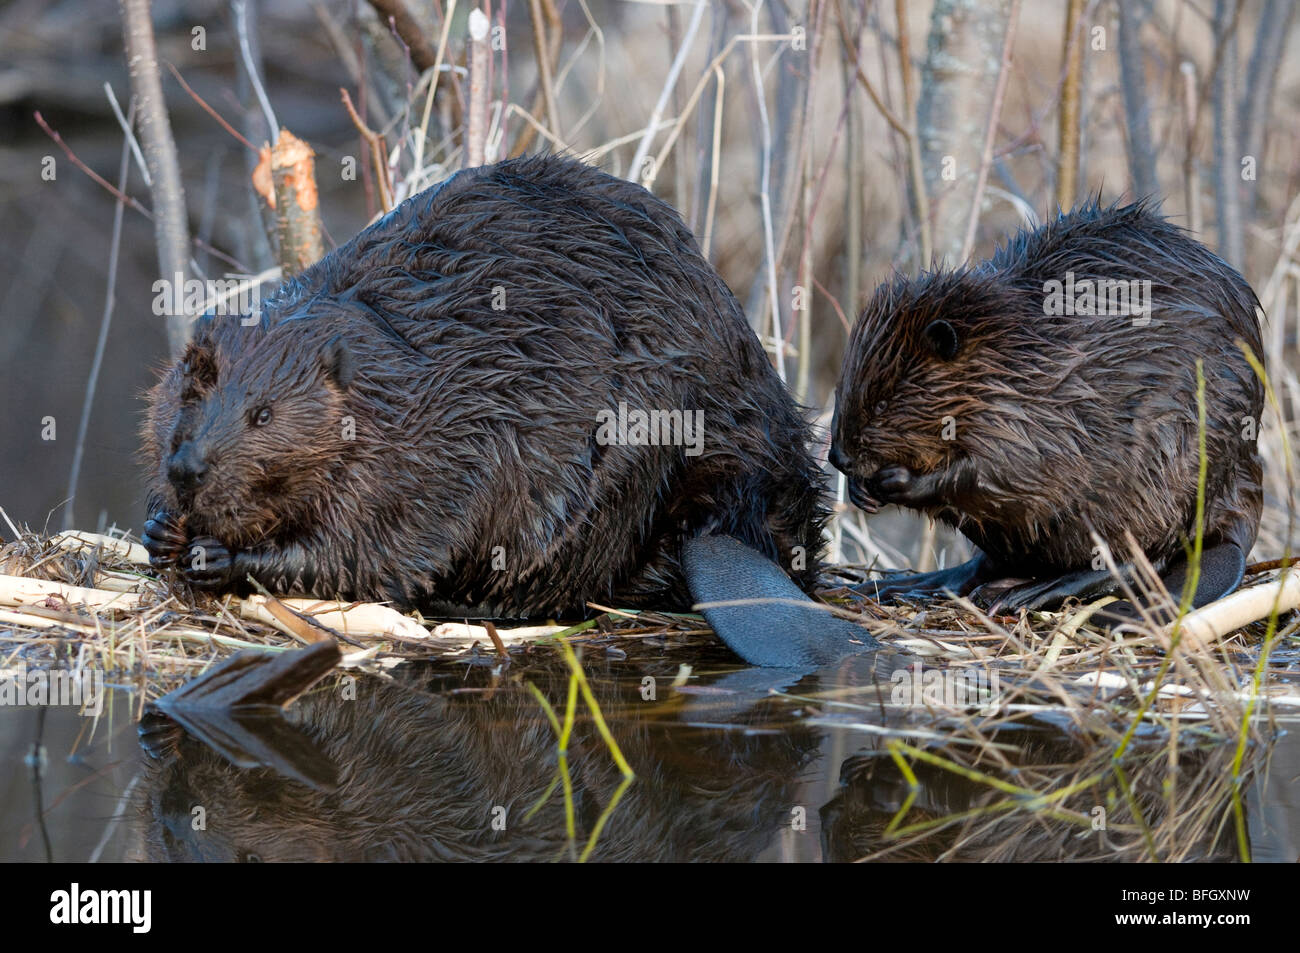 Adult and young beavers (Castor canadensis)  sitting at pond edge feeding on aspen tree branch, Ontario, Canada Stock Photo